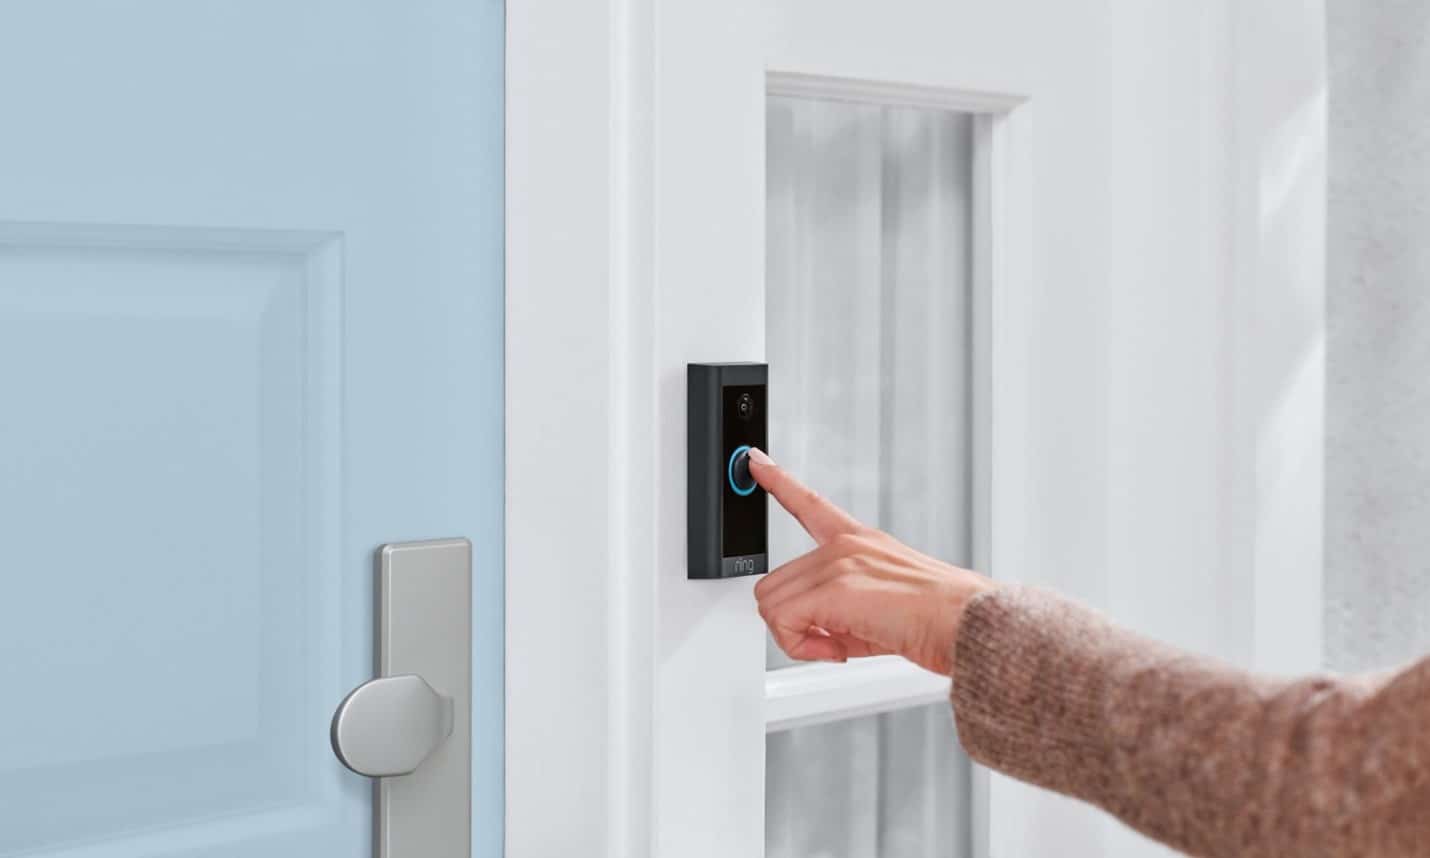 Who Owns Ring Doorbell Company?